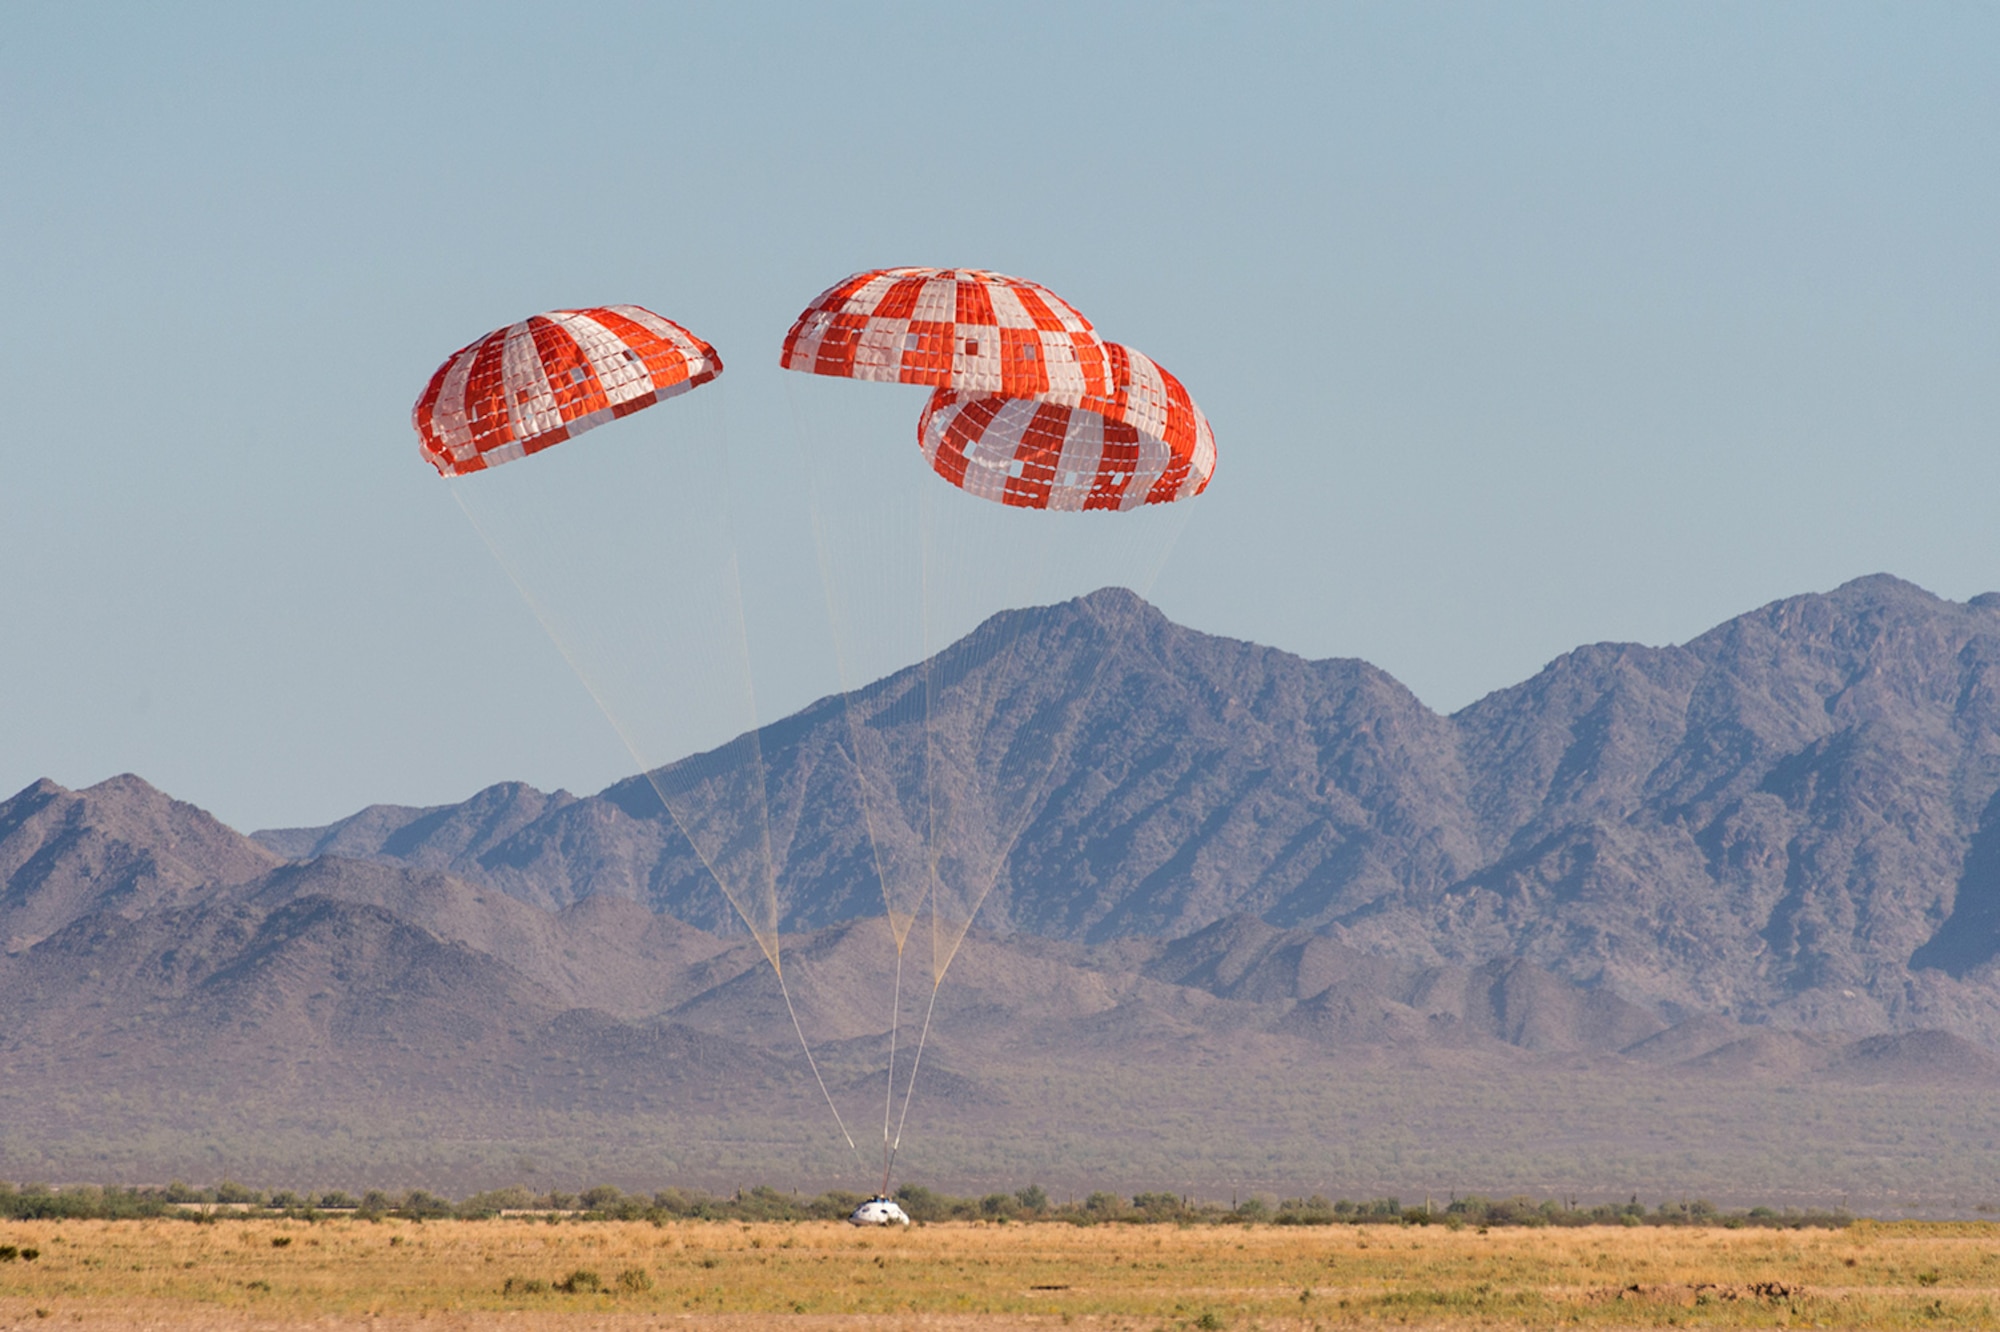 An Orion test capsule with its three main parachutes touches down in the Arizona desert Sept. 12, 2018. The evaluation was the final test to qualify Orion’s parachute system for flights with astronauts. (U.S. Army photo)